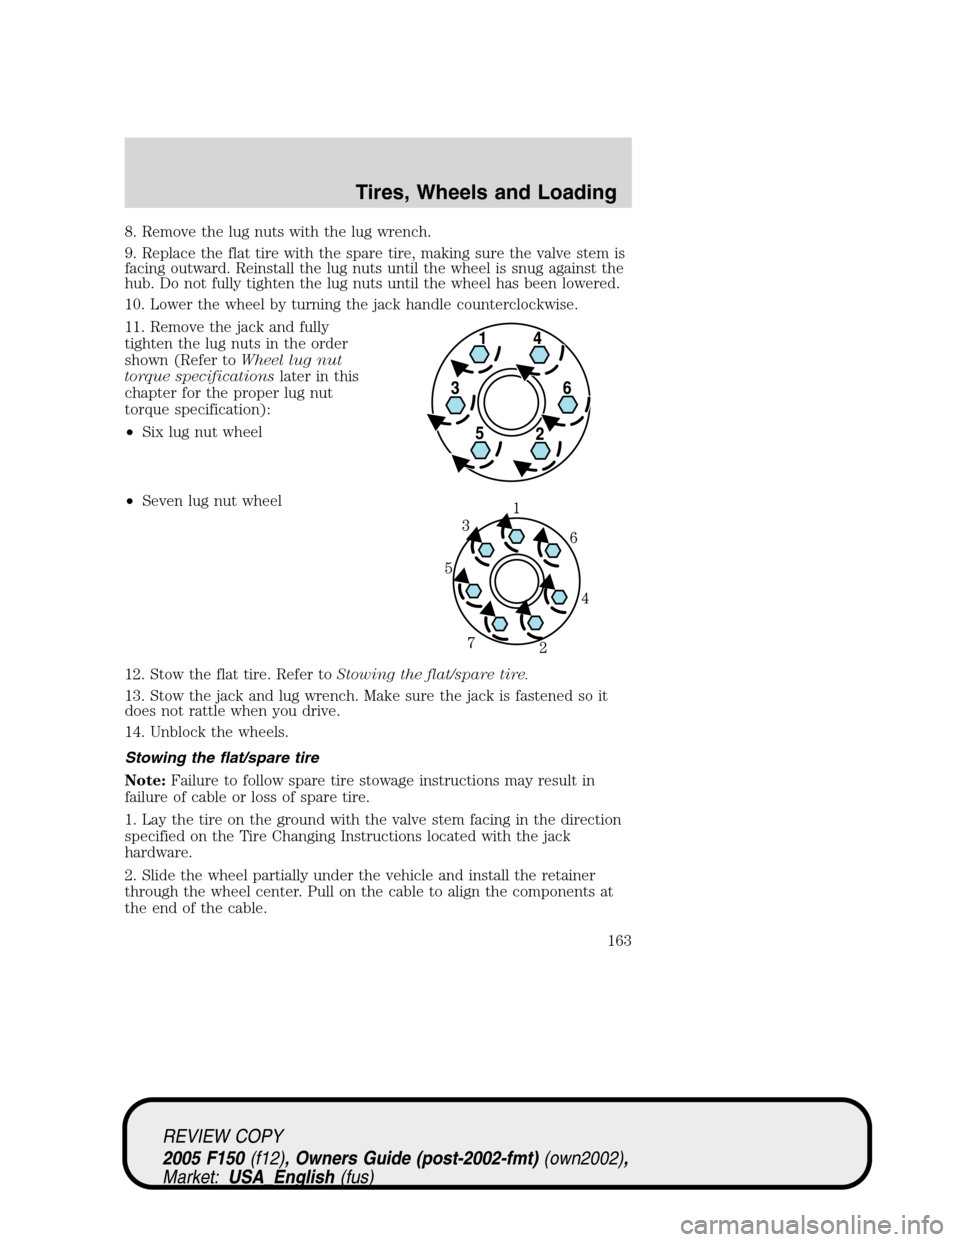 FORD F150 2005 11.G Owners Manual 8. Remove the lug nuts with the lug wrench.
9. Replace the flat tire with the spare tire, making sure the valve stem is
facing outward. Reinstall the lug nuts until the wheel is snug against the
hub. 